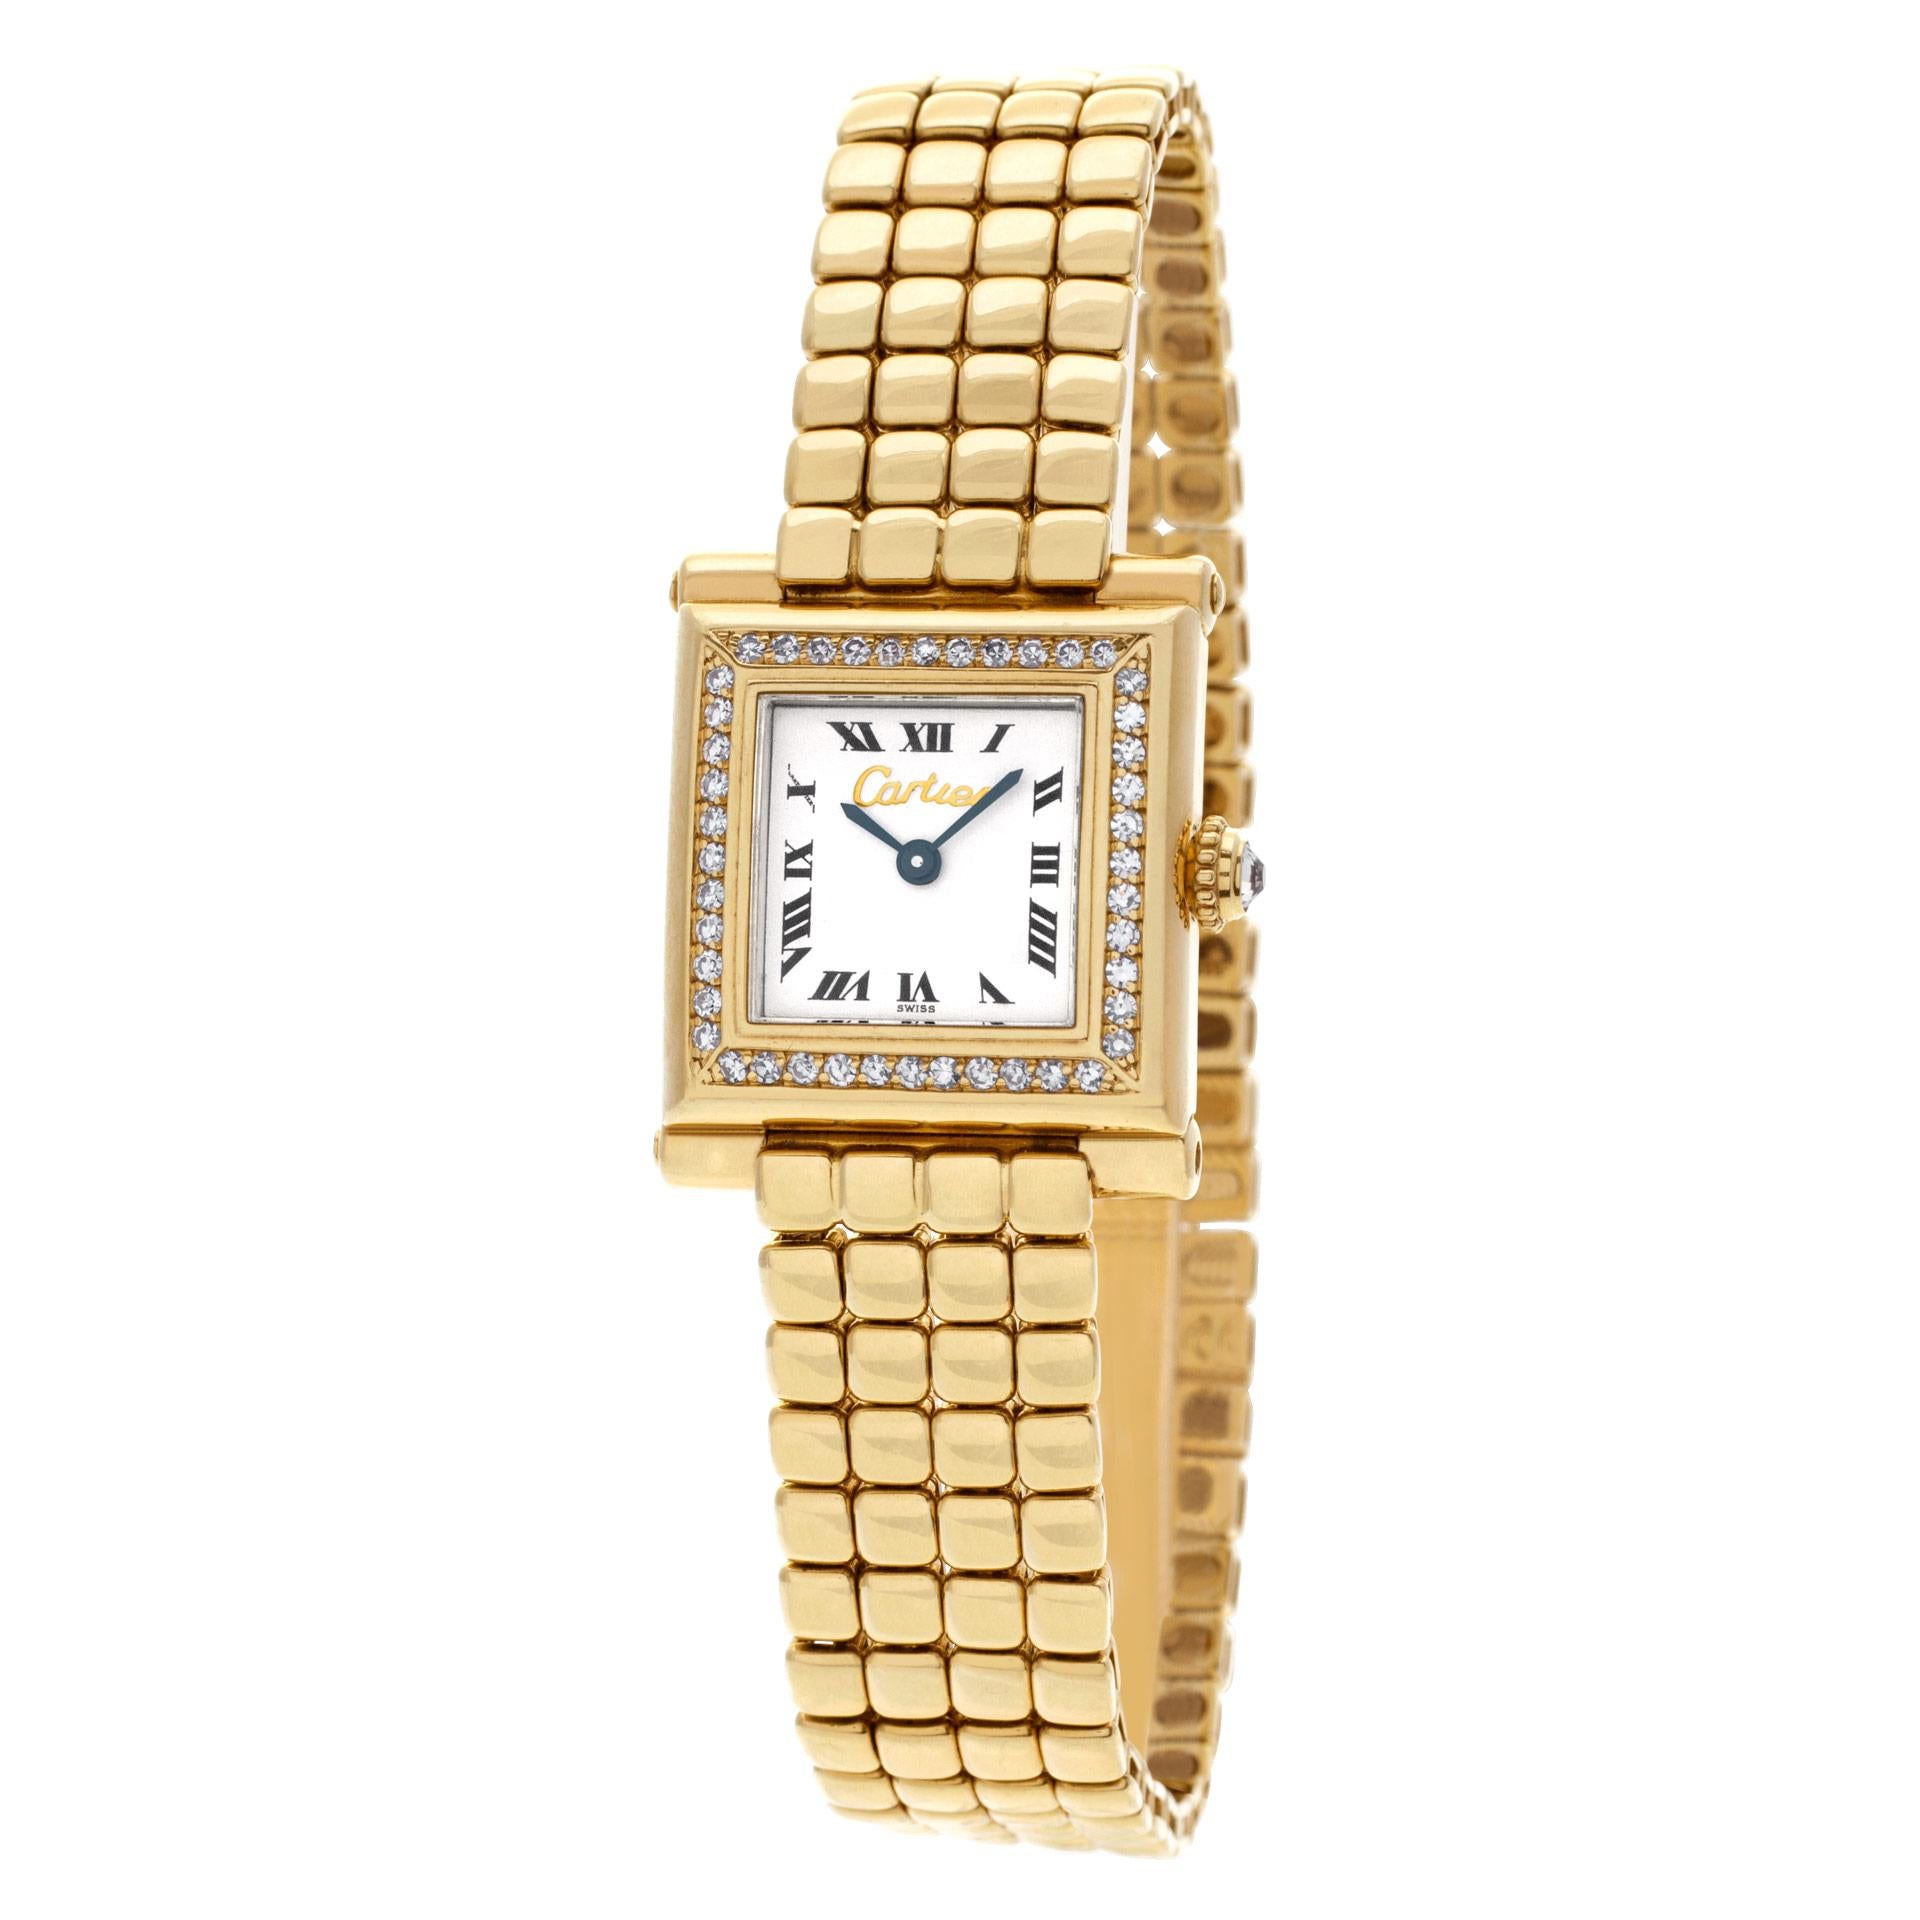 Ladies Elegant Limited Edition Cartier Trocadero in 18k yellow gold with Cartier original diamond bezel and crown. Quartz. Fits 7 inches wrist. 20mm case size. Circa 2000s. Fine Pre-owned Cartier Watch.  Certified preowned Cartier Trocadero watch is